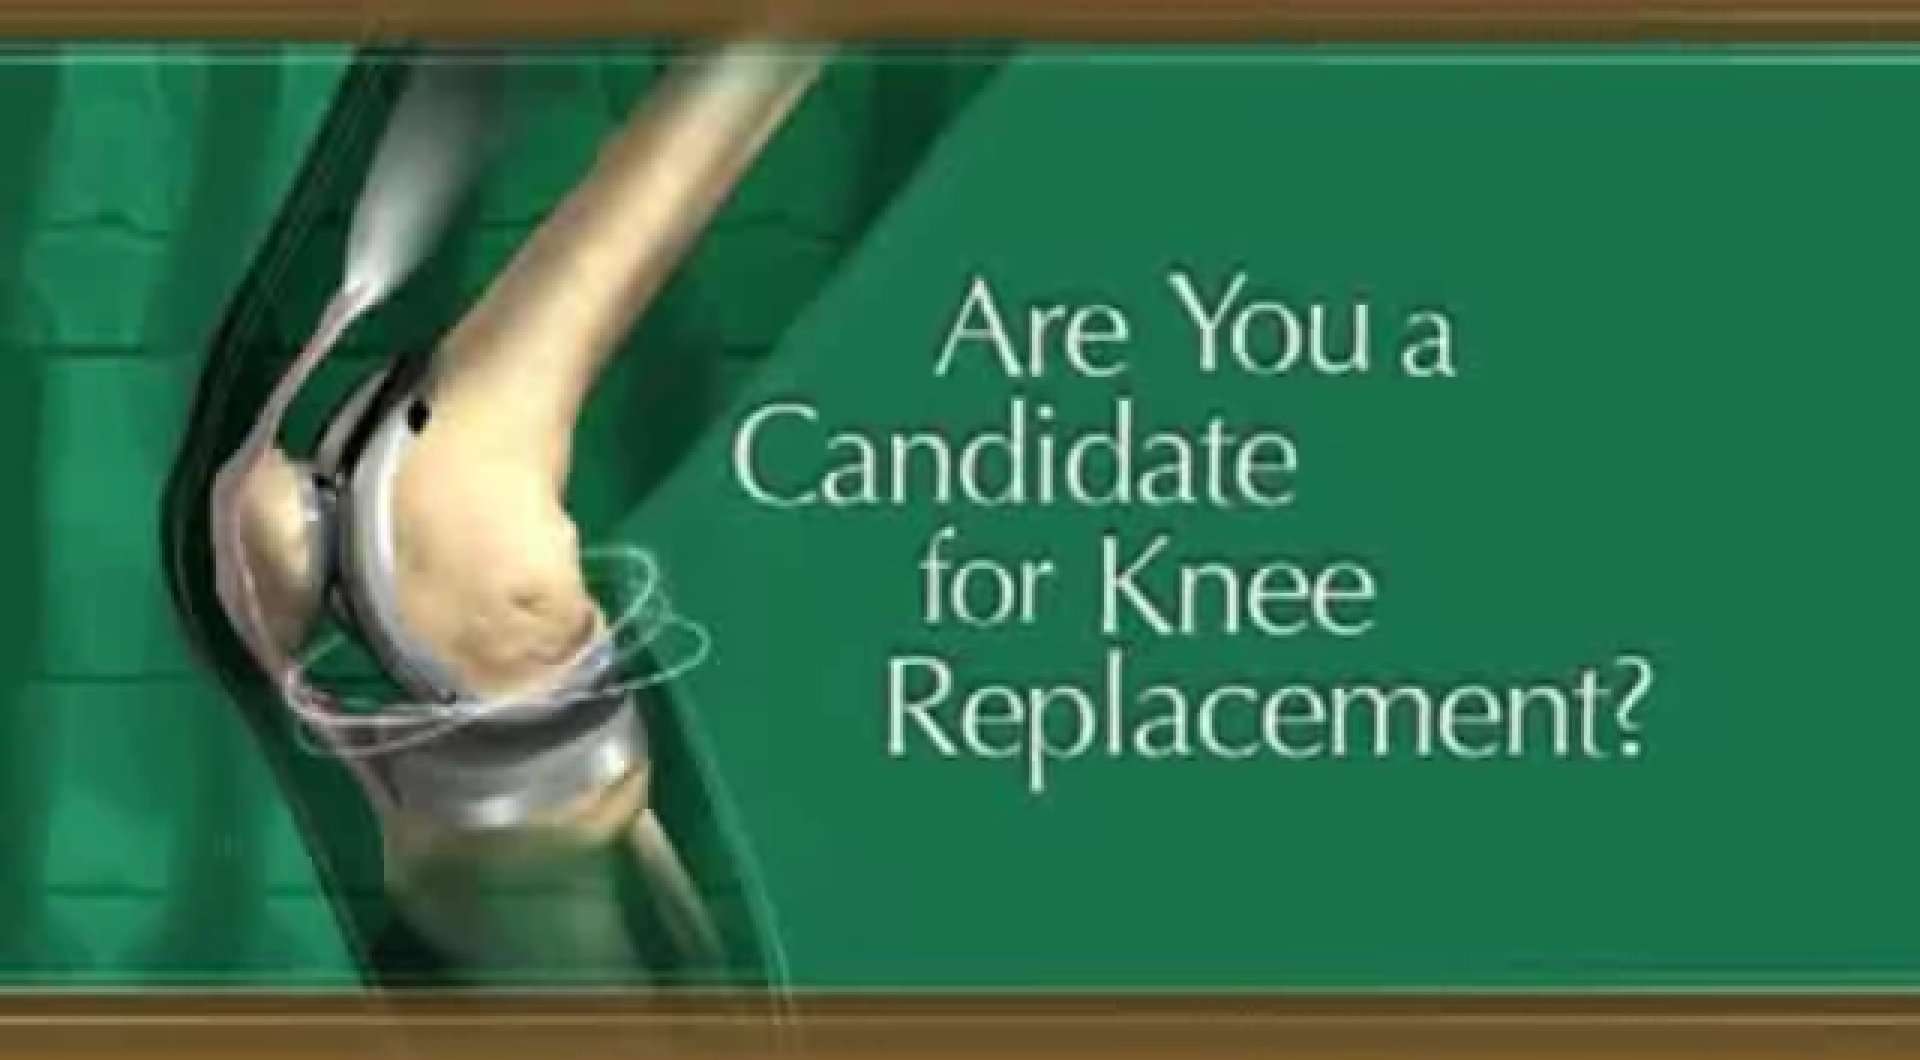 How do I know if I need knee replacement surgery?